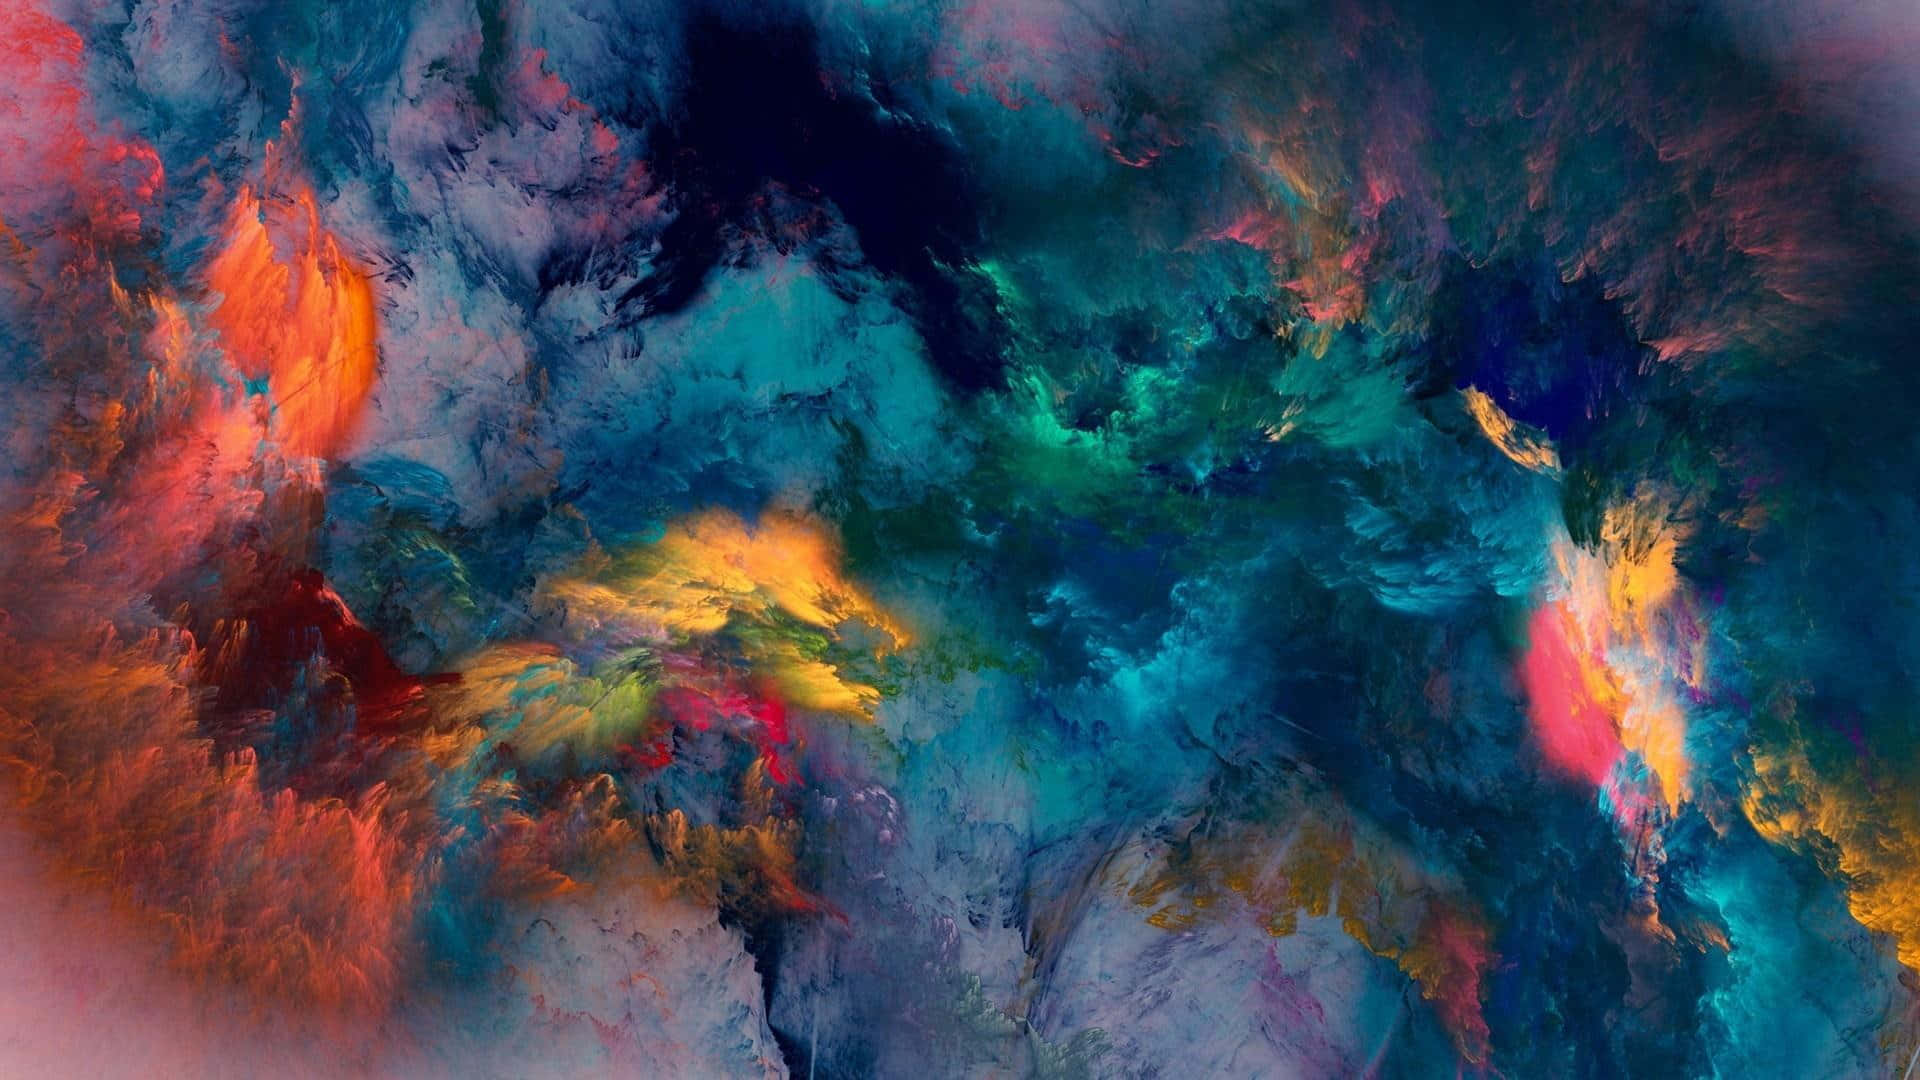 A cosmic journey through the vibrant galaxy Wallpaper